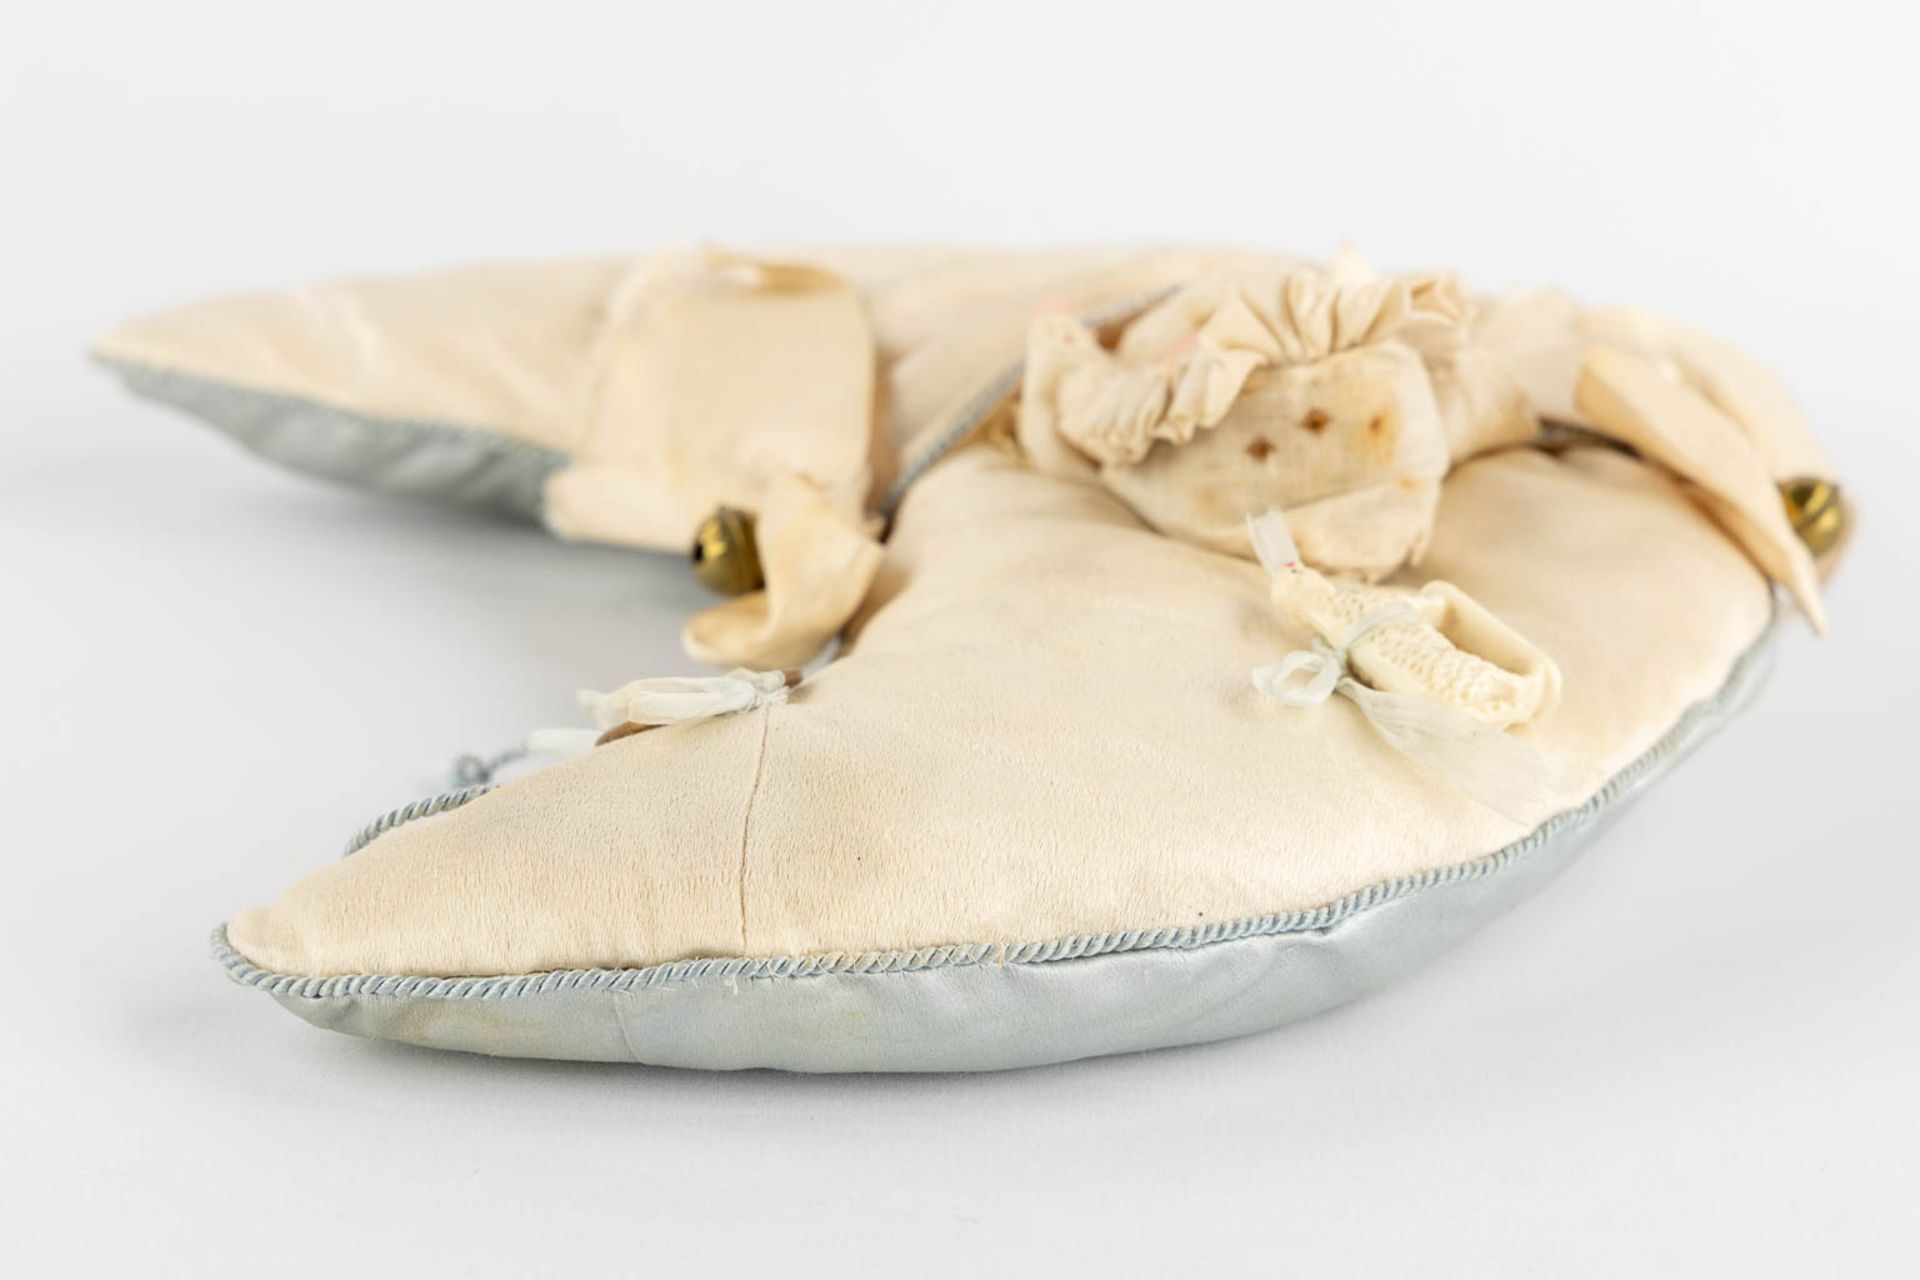 An antique doll in a crescent moon-shaped sleeping bag. Putnam 1922. (W:23 x H:26 cm) - Image 8 of 13